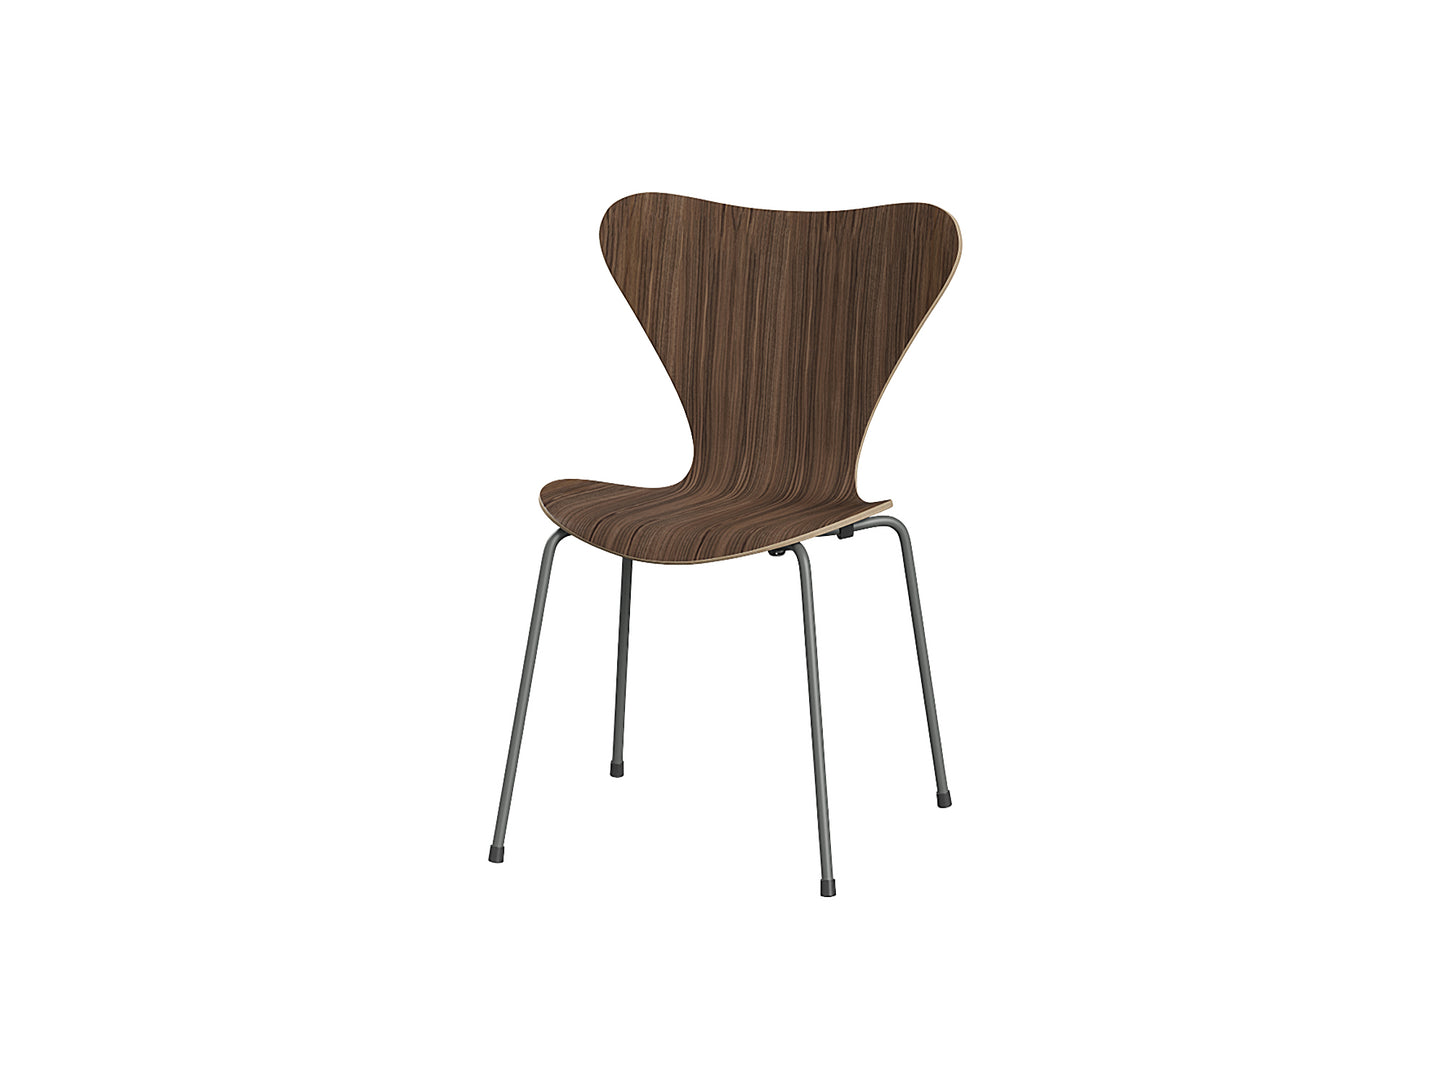 Series 7 Dining Chair (Clear Lacquered Wood) by Fritz Hanse - Walnut / Silver Grey Steel